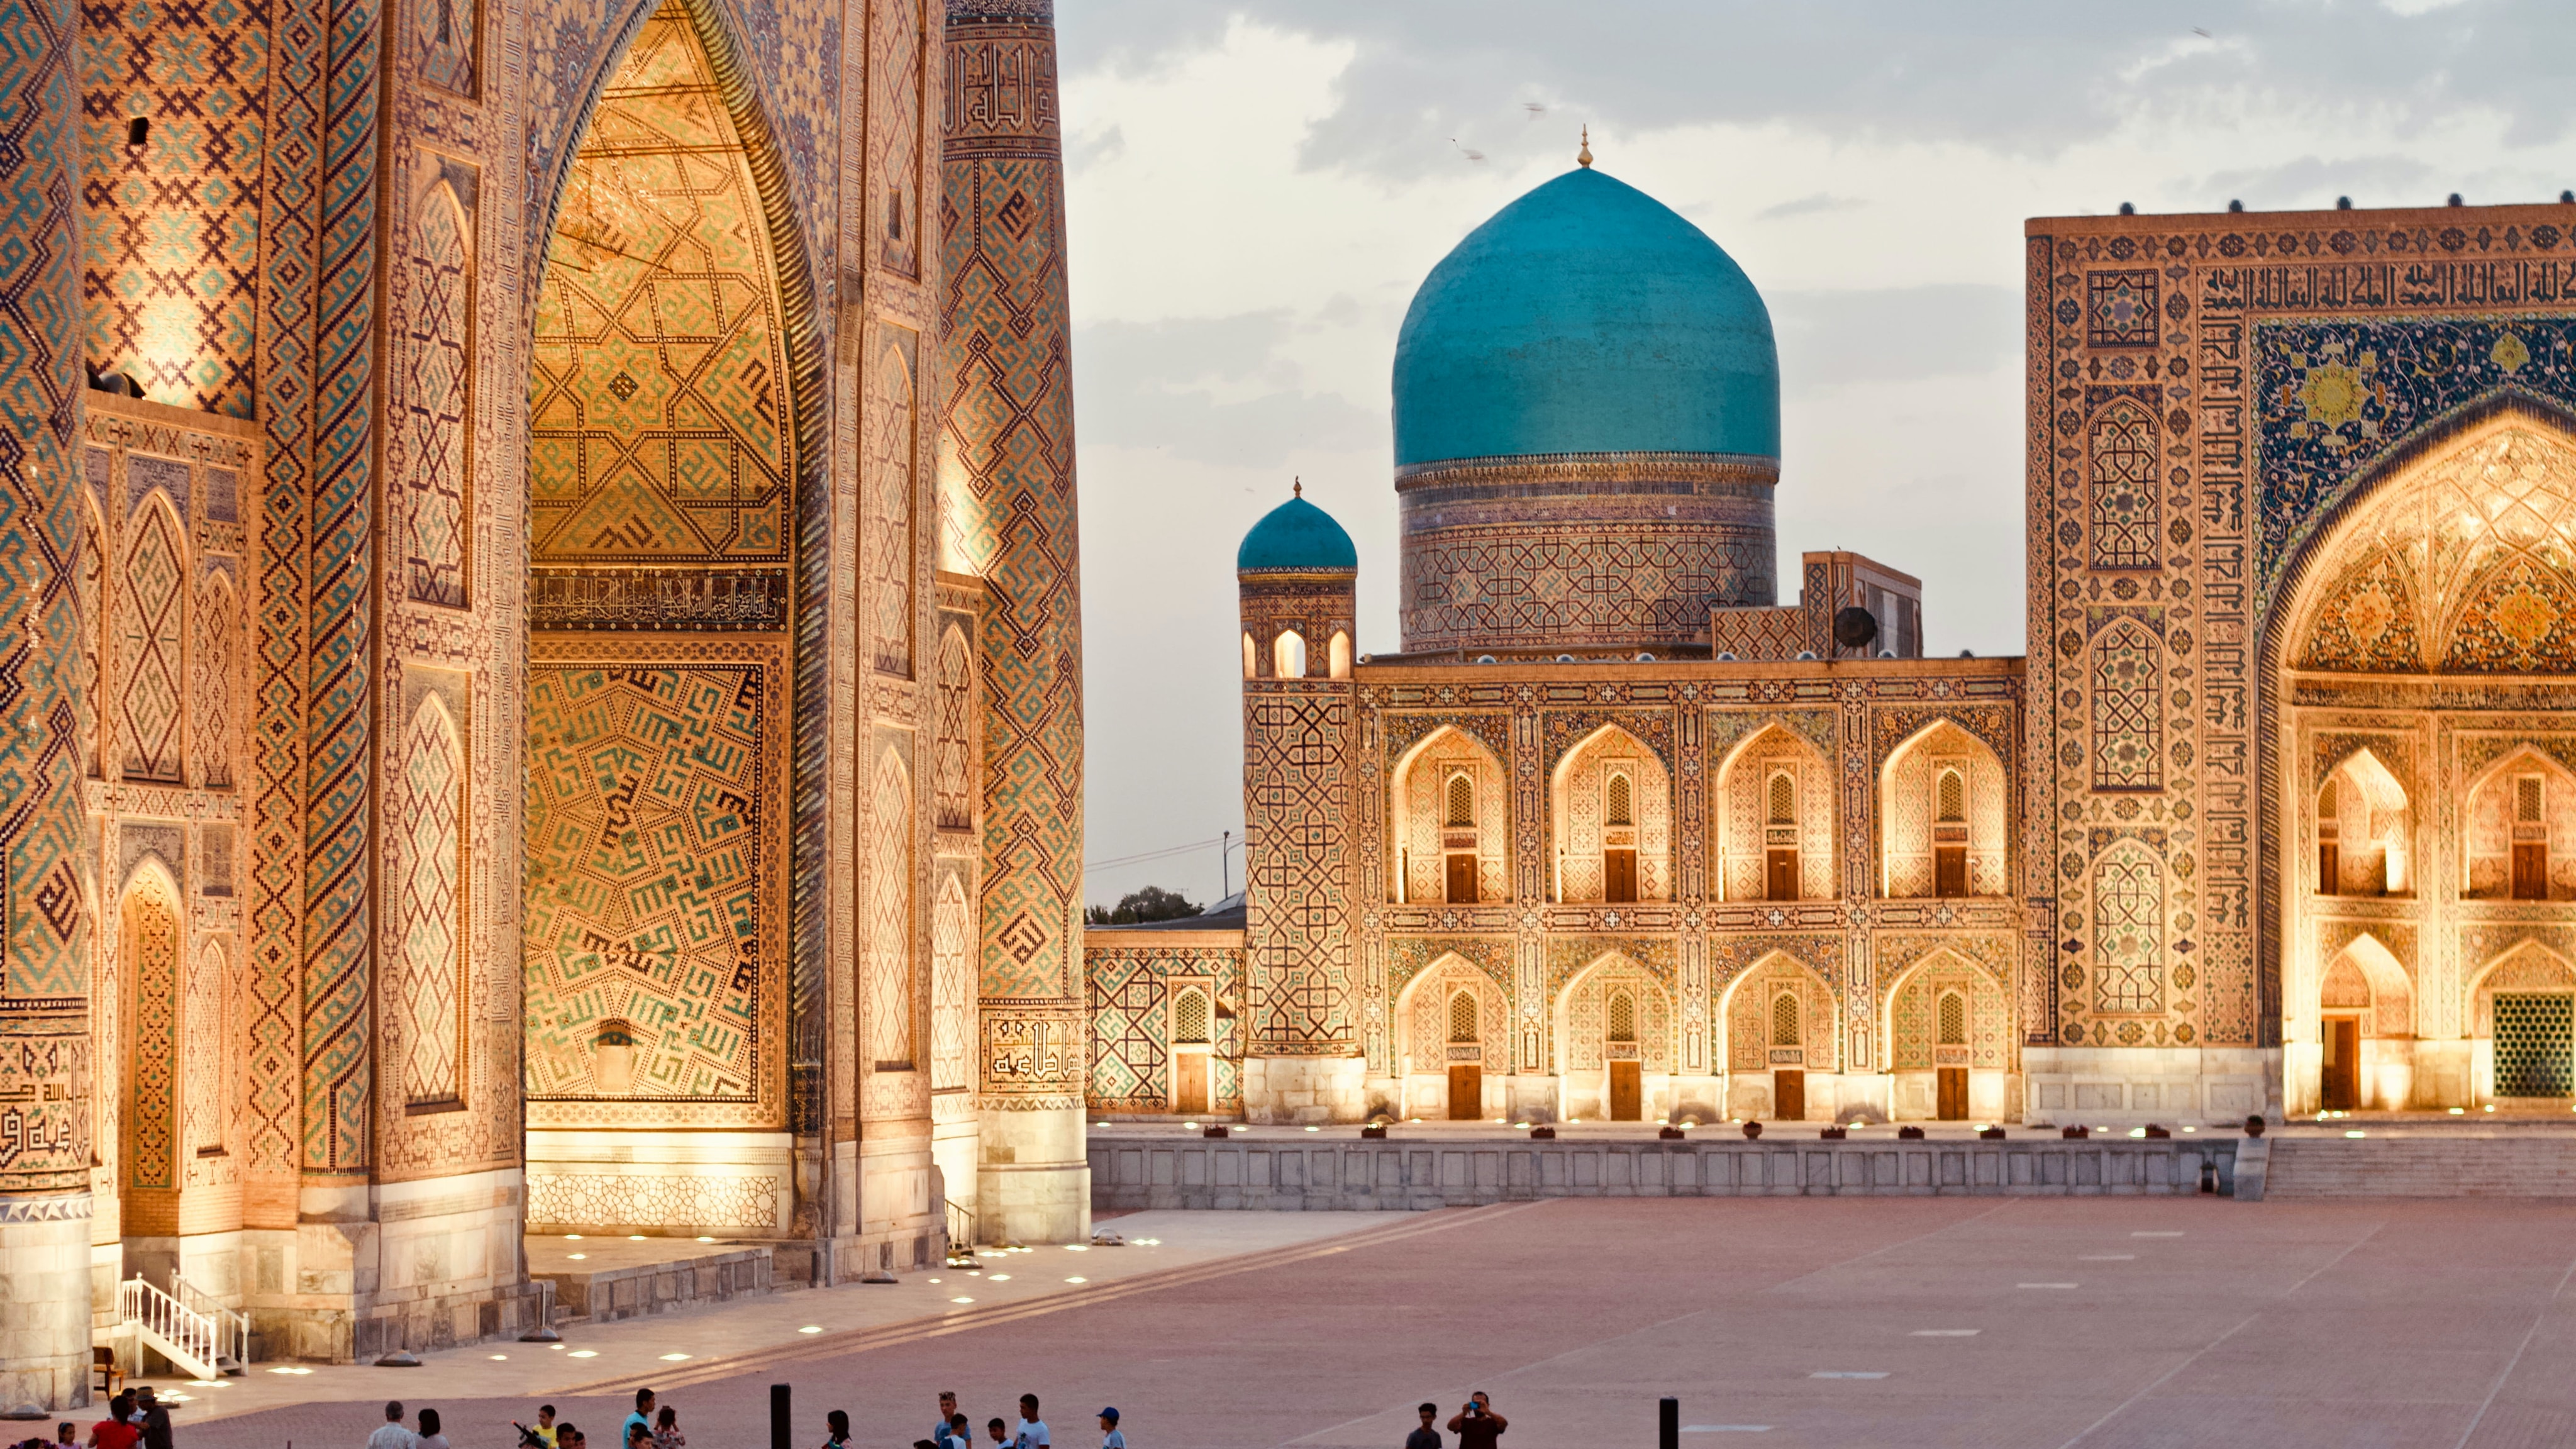 Day6 : Day 6: Samarkand - Immersing in Oriental Tales